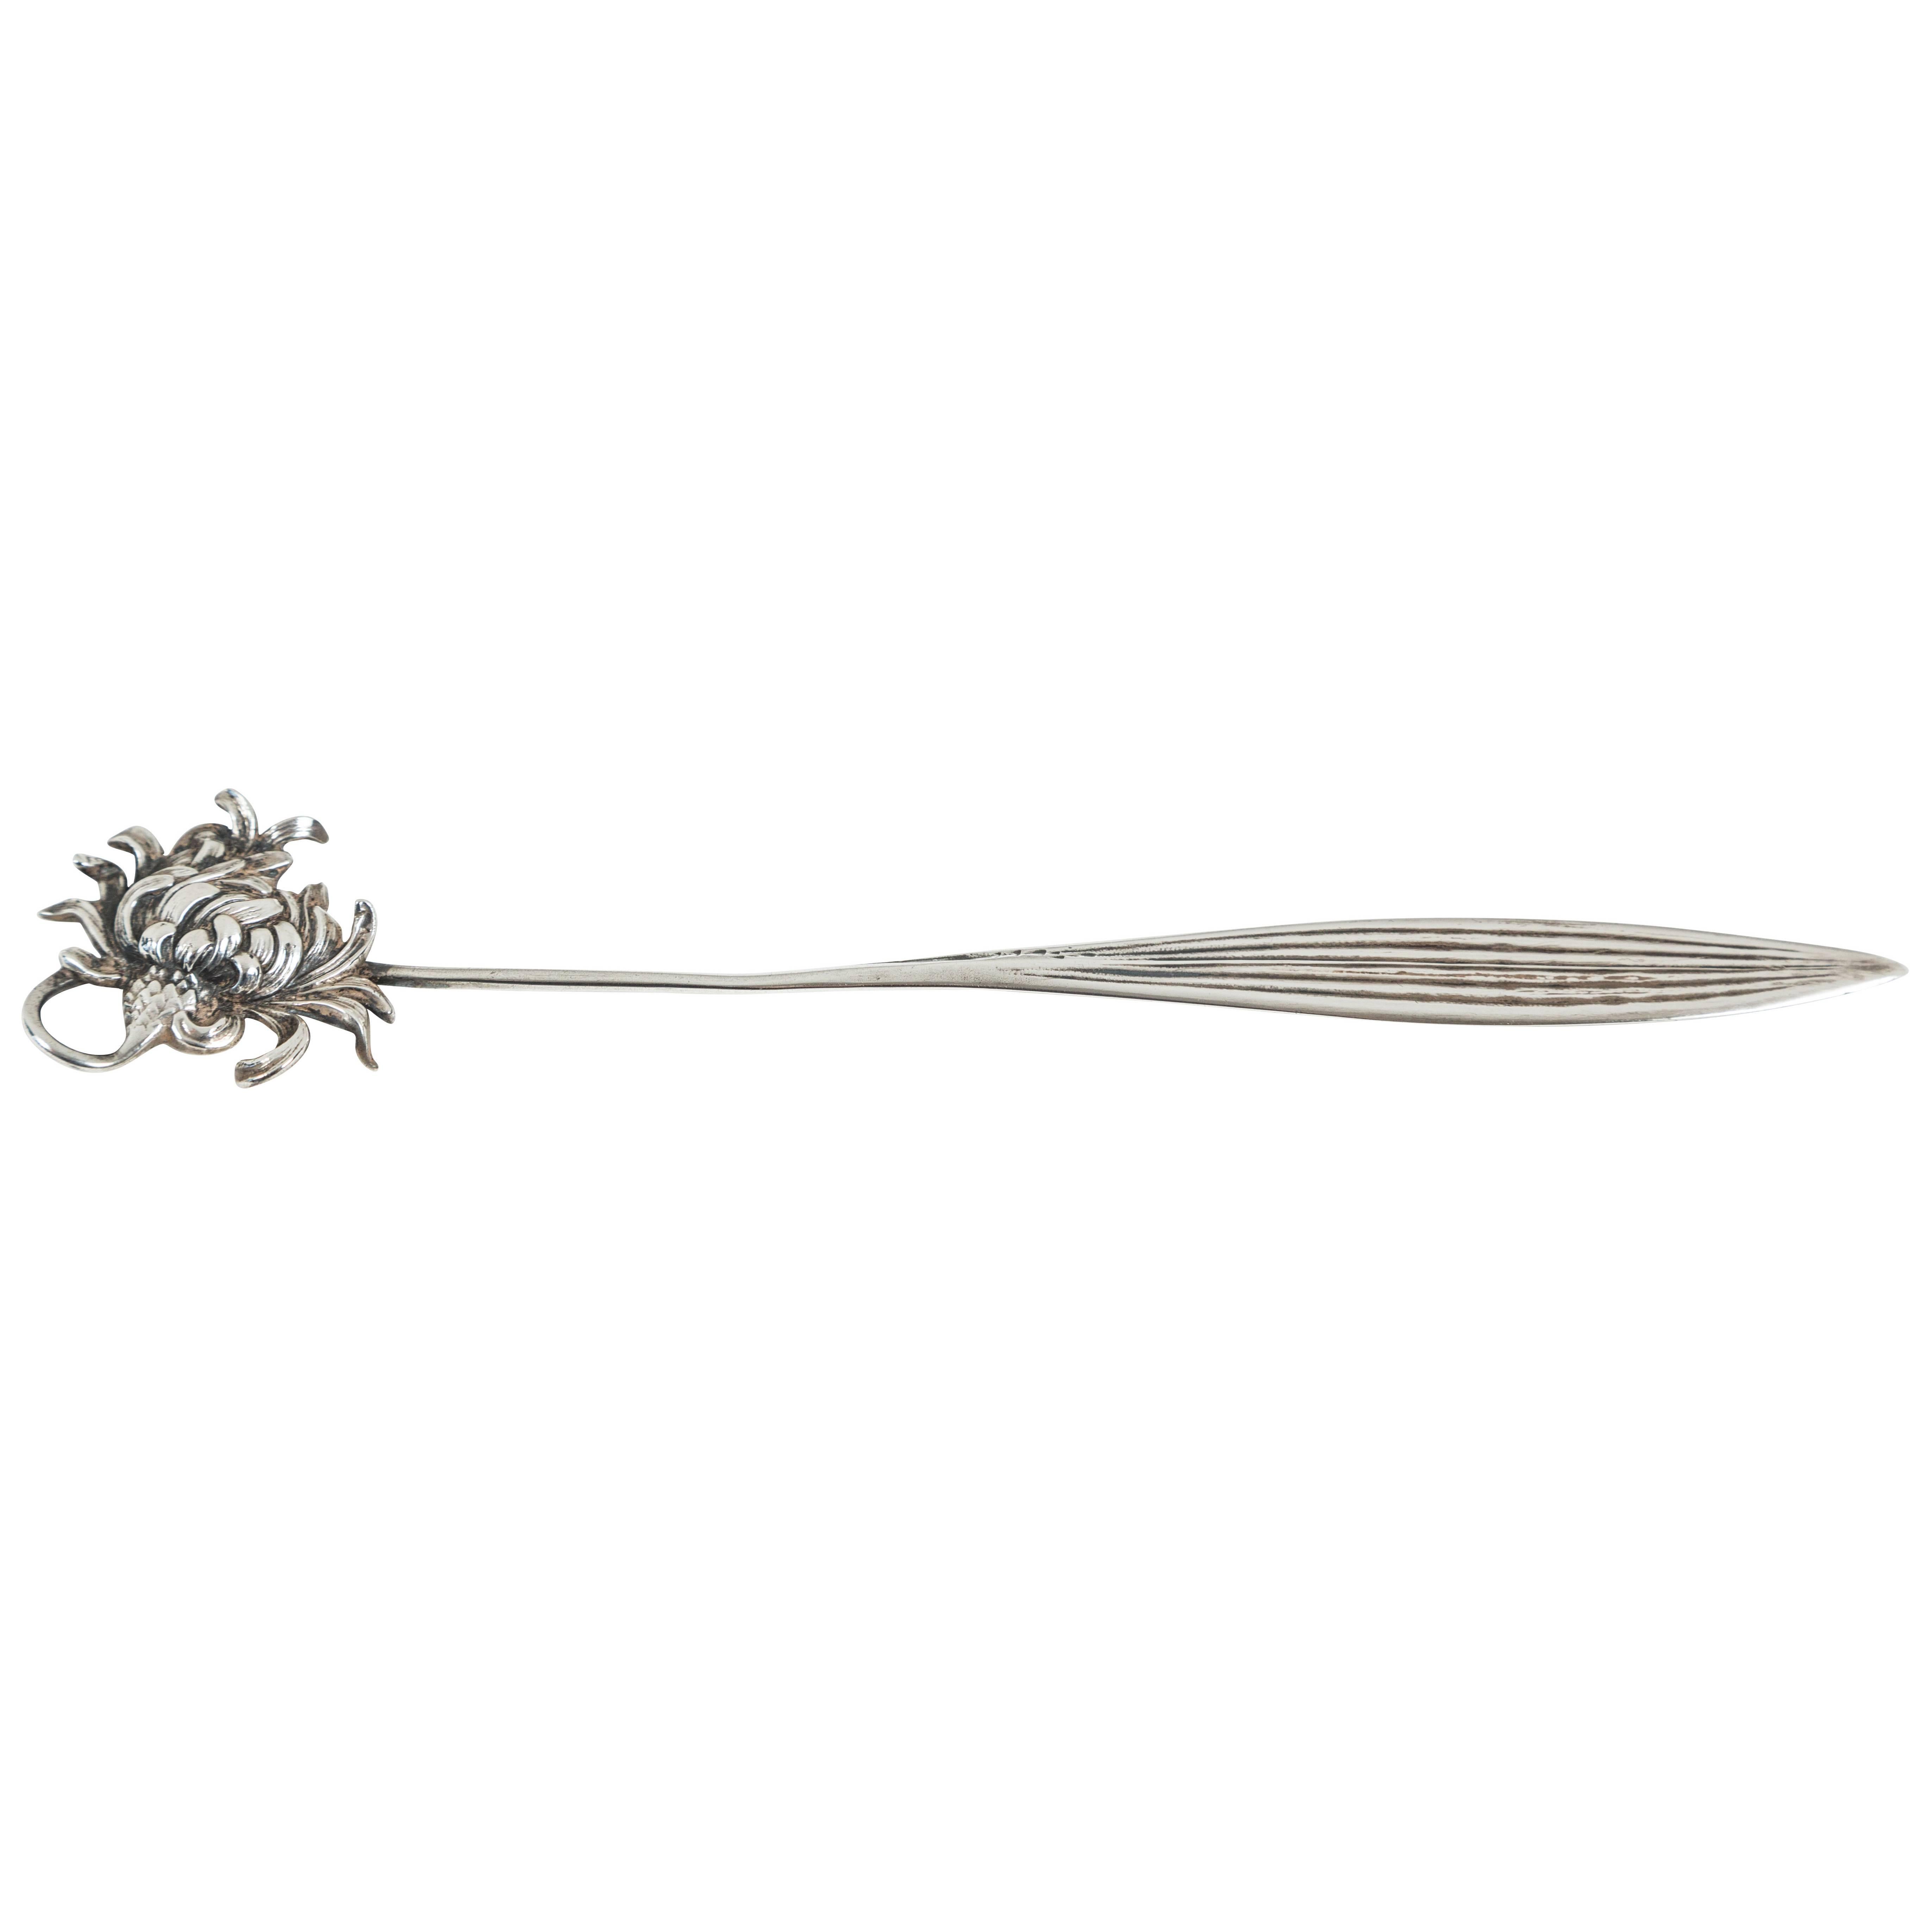 Unique Sterling Chrysanthemum Letter Opener by George W. Shiebler